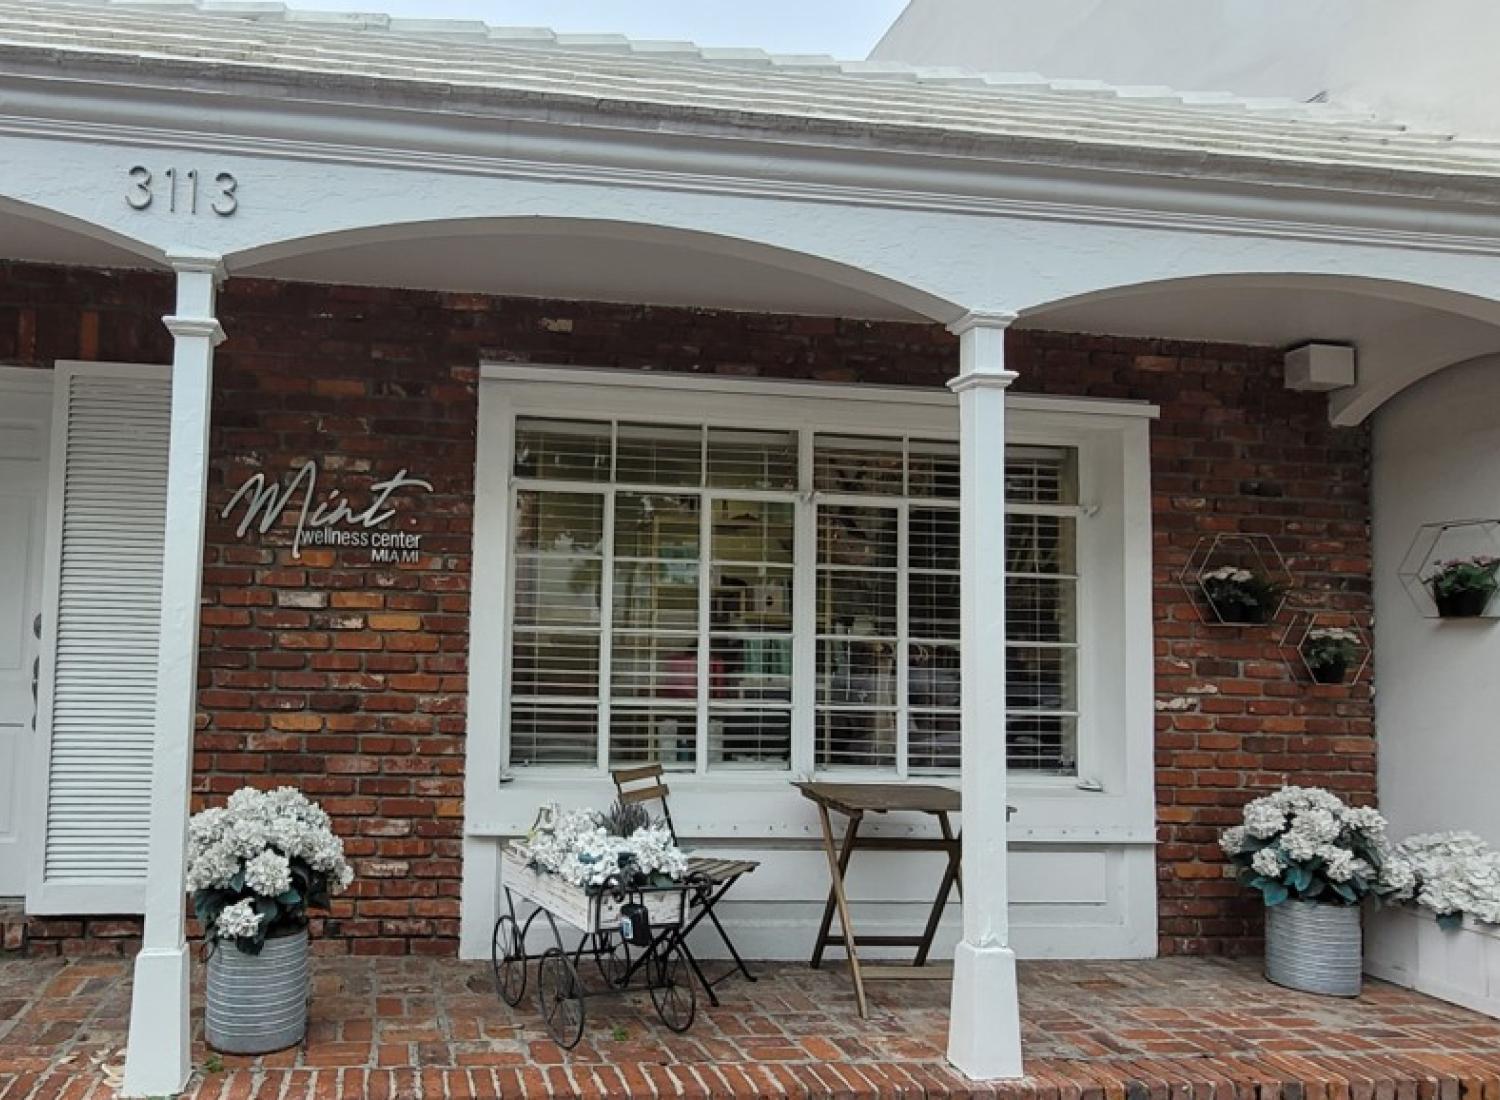 Brick house with white pillars and bouquets of white flowers on the porch